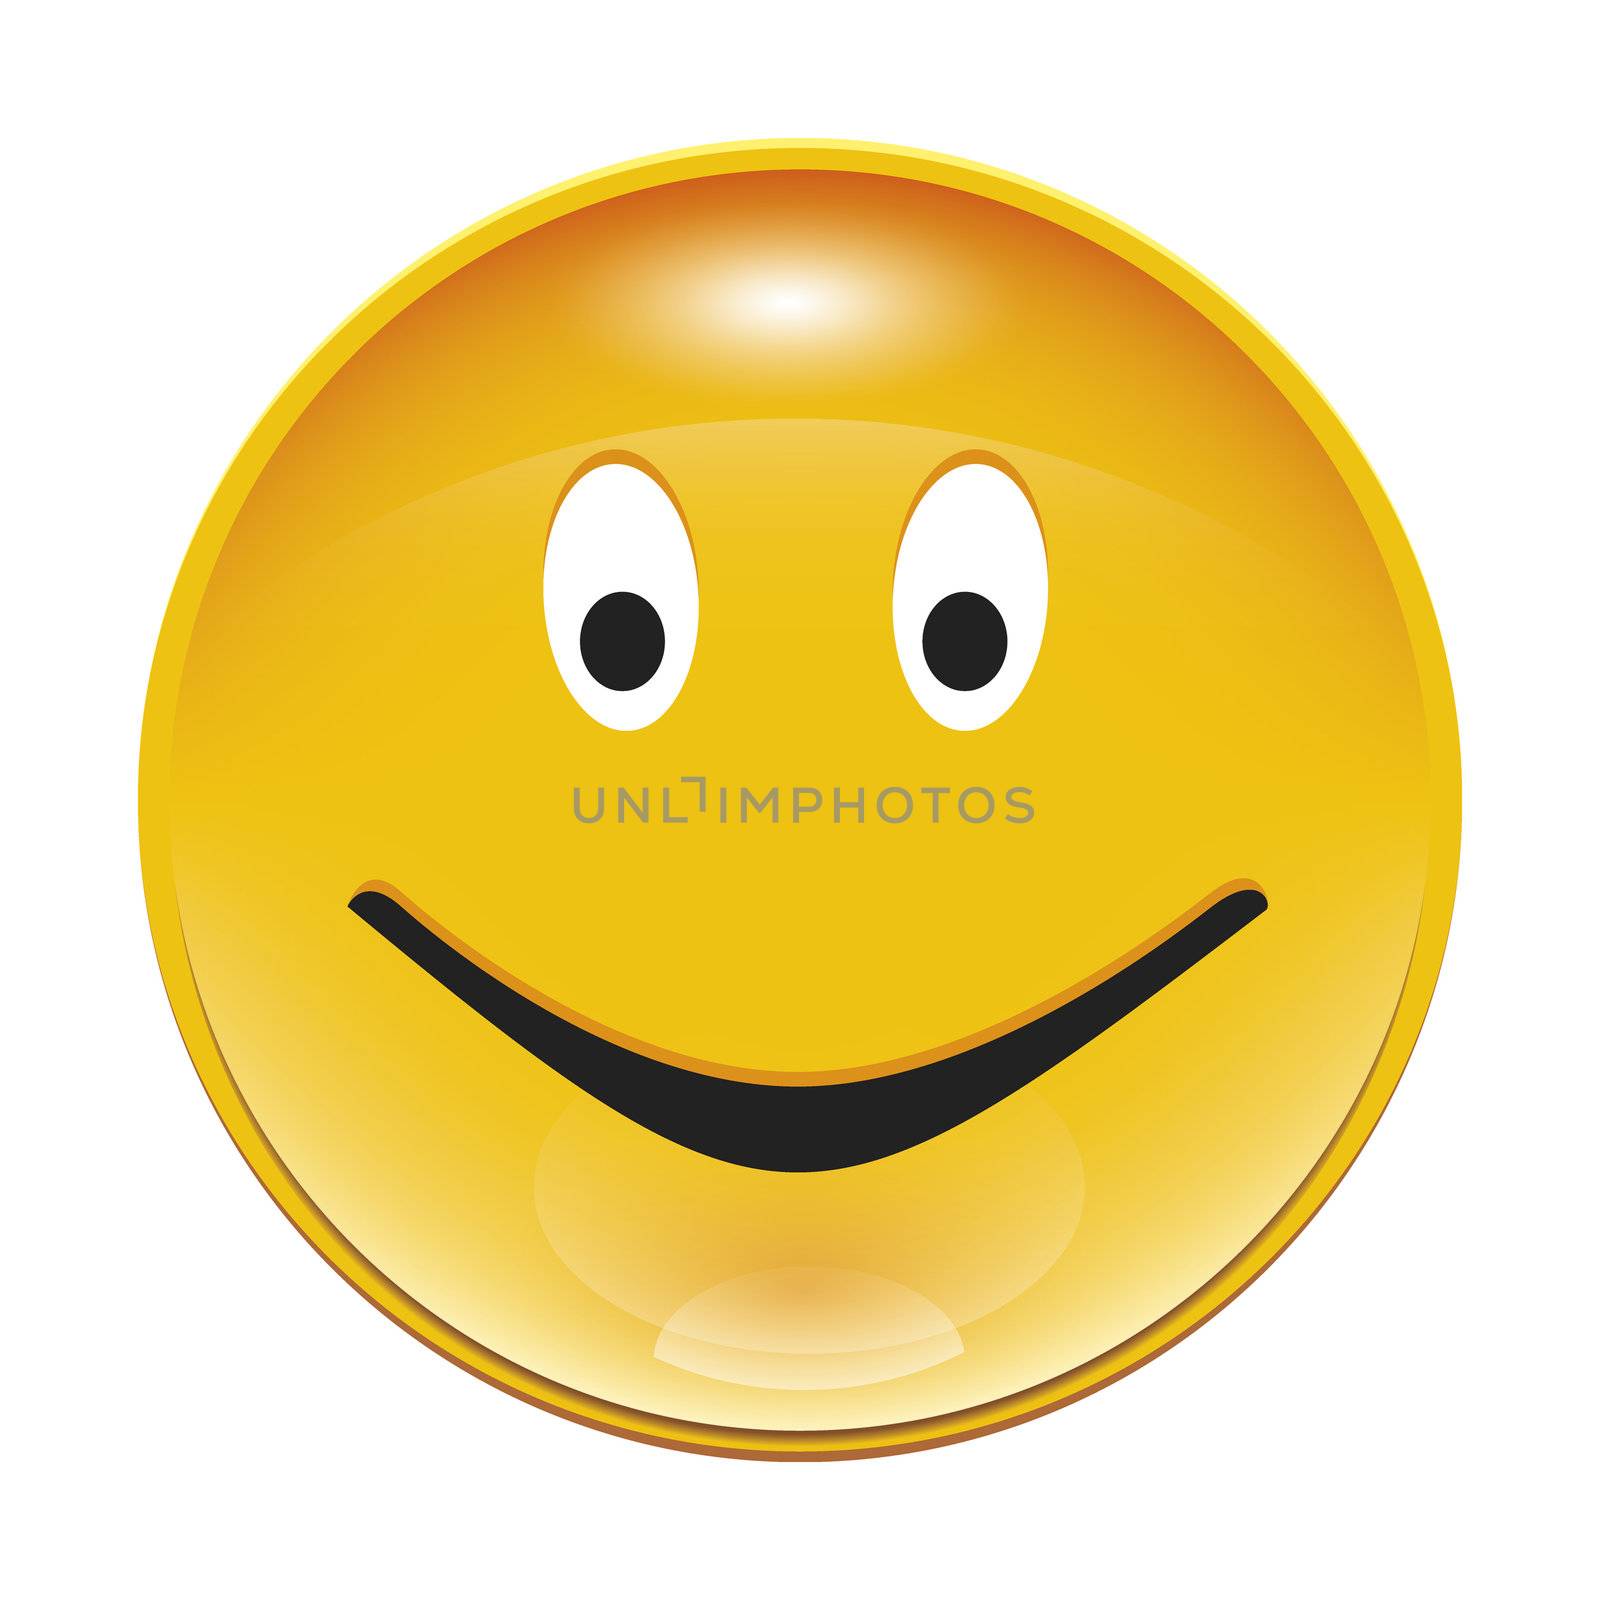 An image of nice yellow smiley button